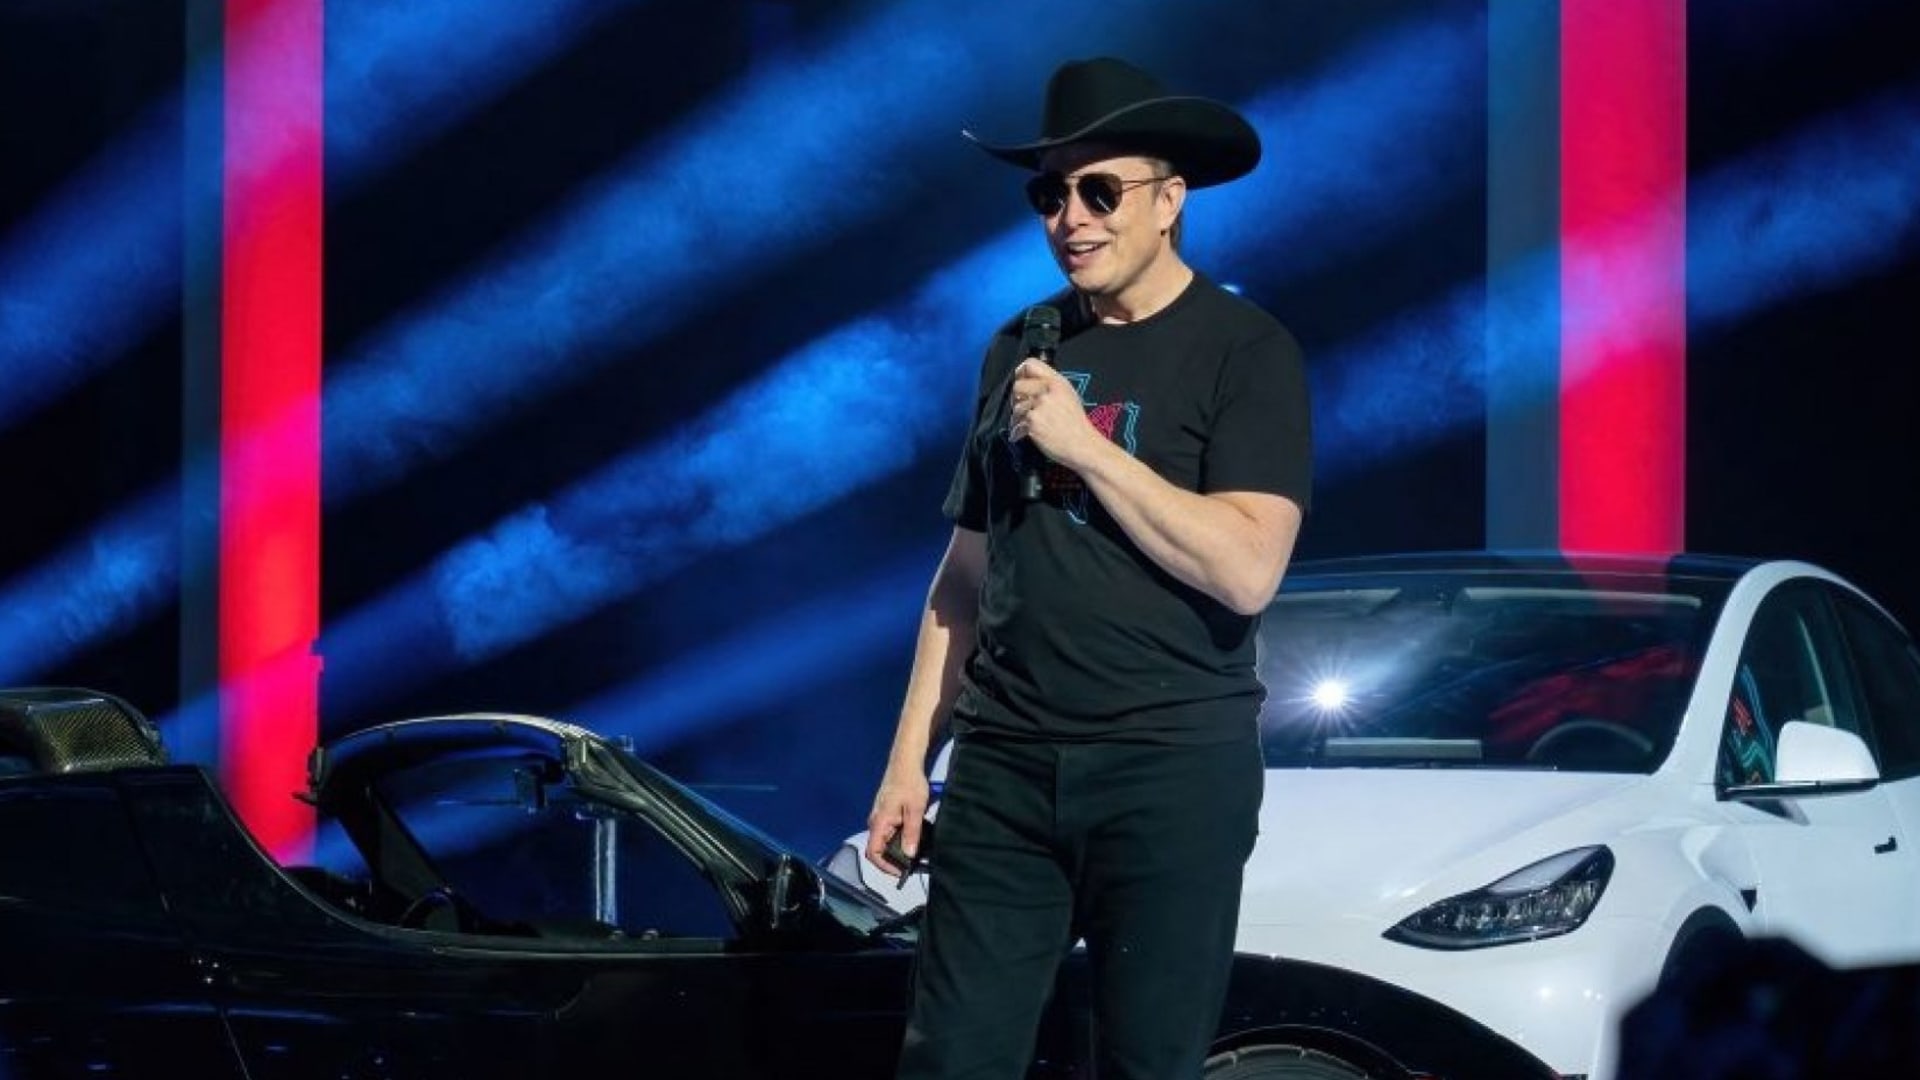 Elon Musk Admitted He Didn't Think Tesla Would Make It. Here's What He Says Proved Him Wrong